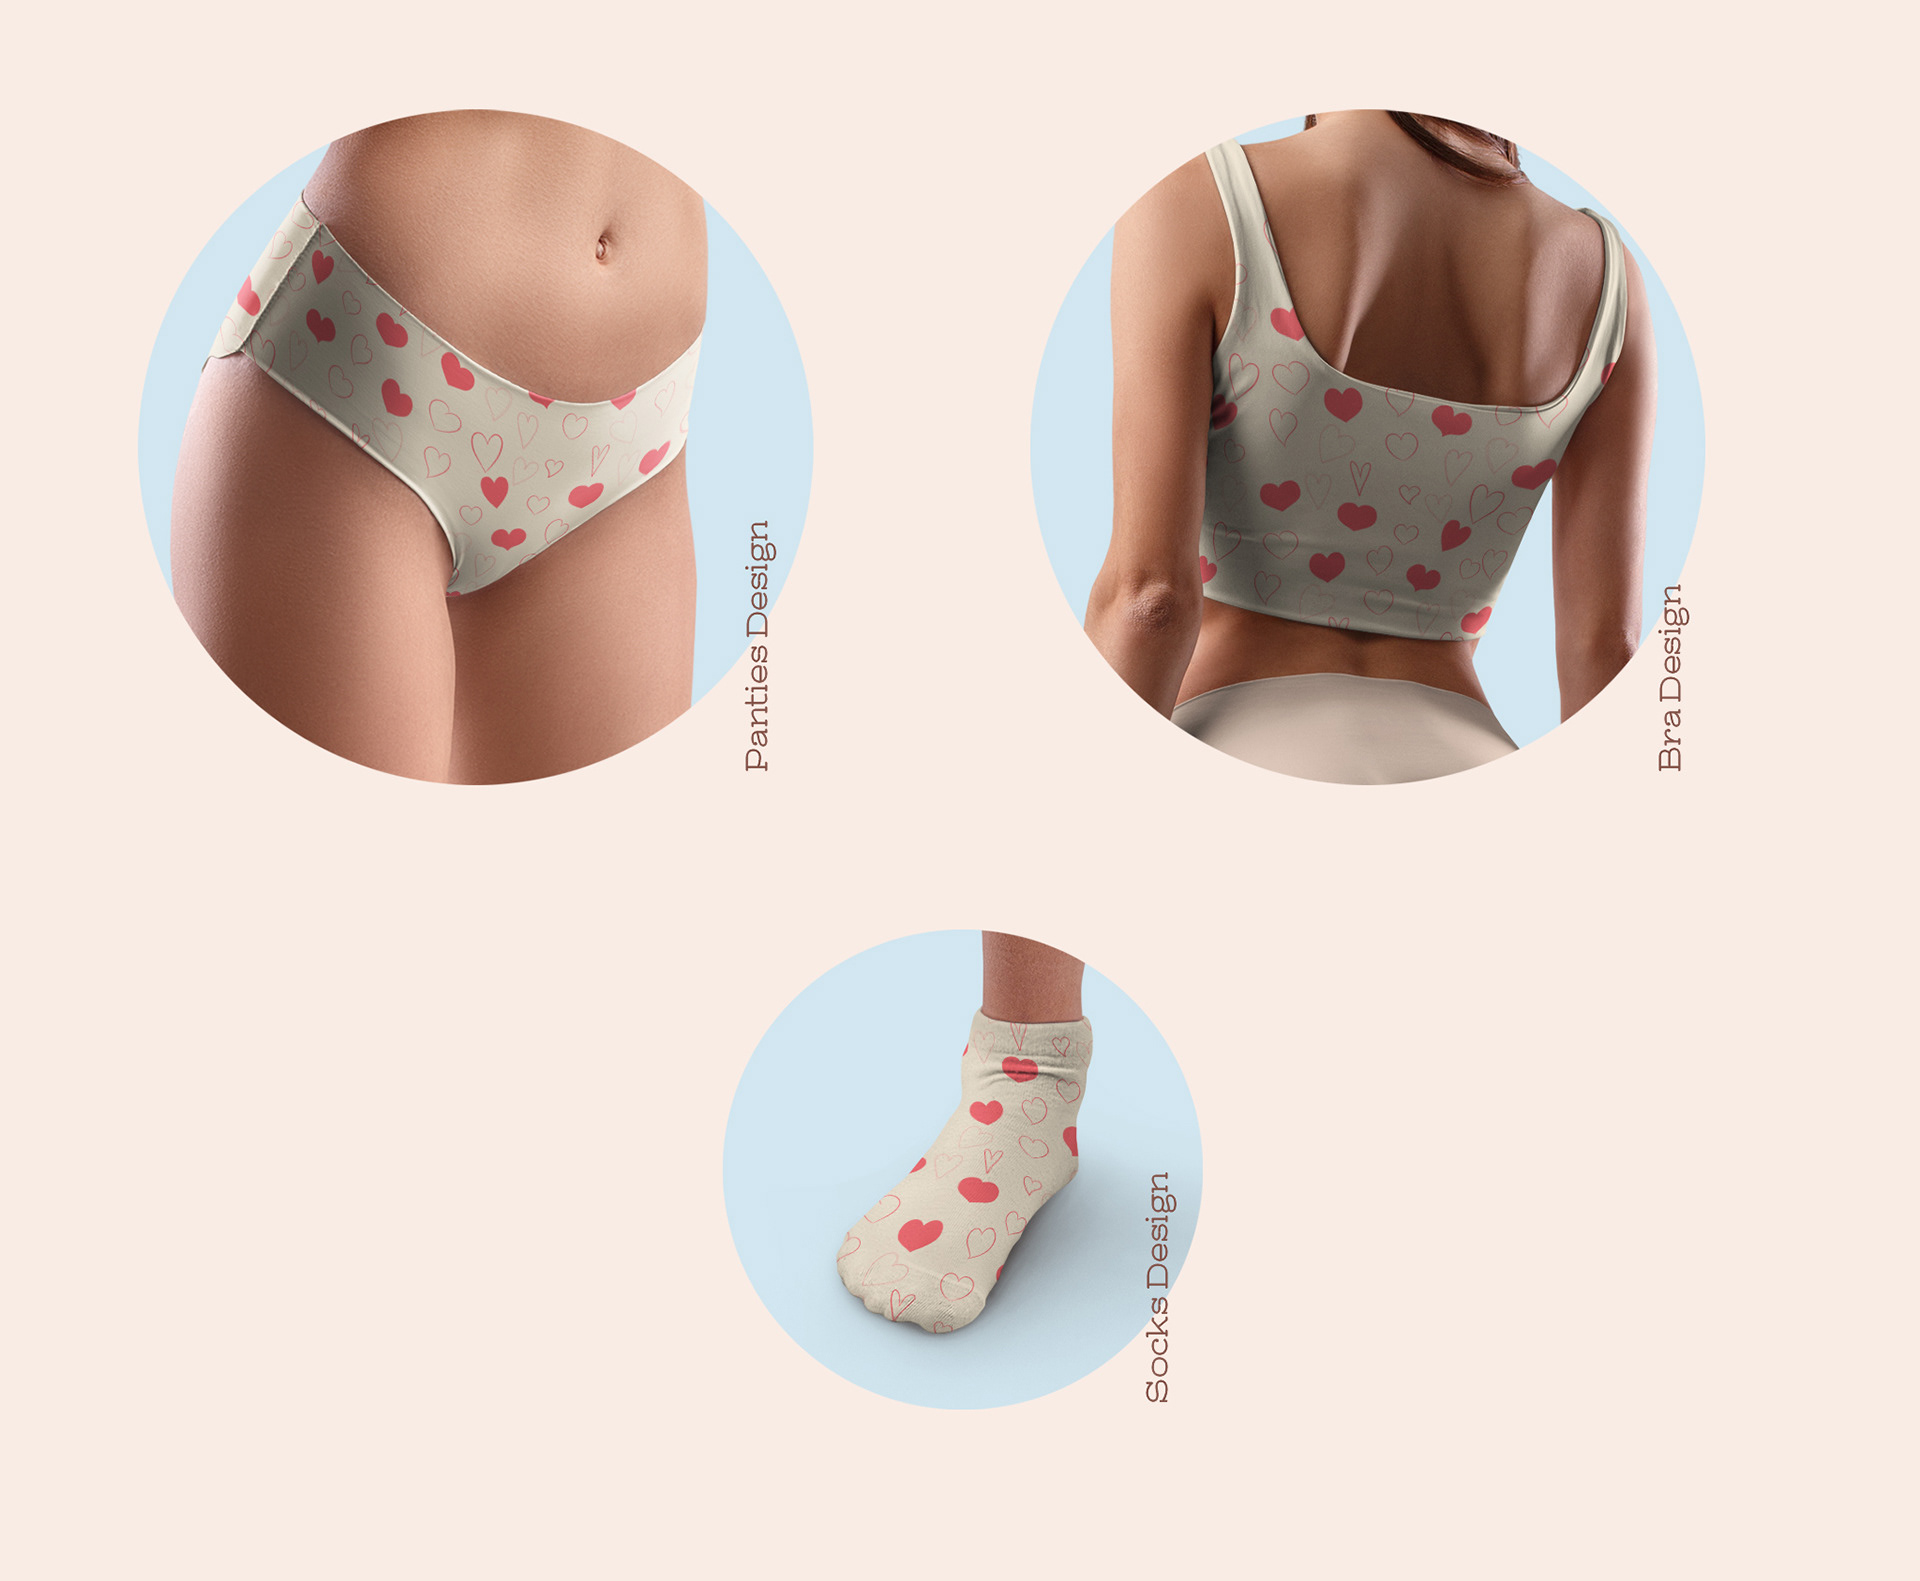 Page 2  Bra Panty Models PSD, 500+ High Quality Free PSD Templates for  Download